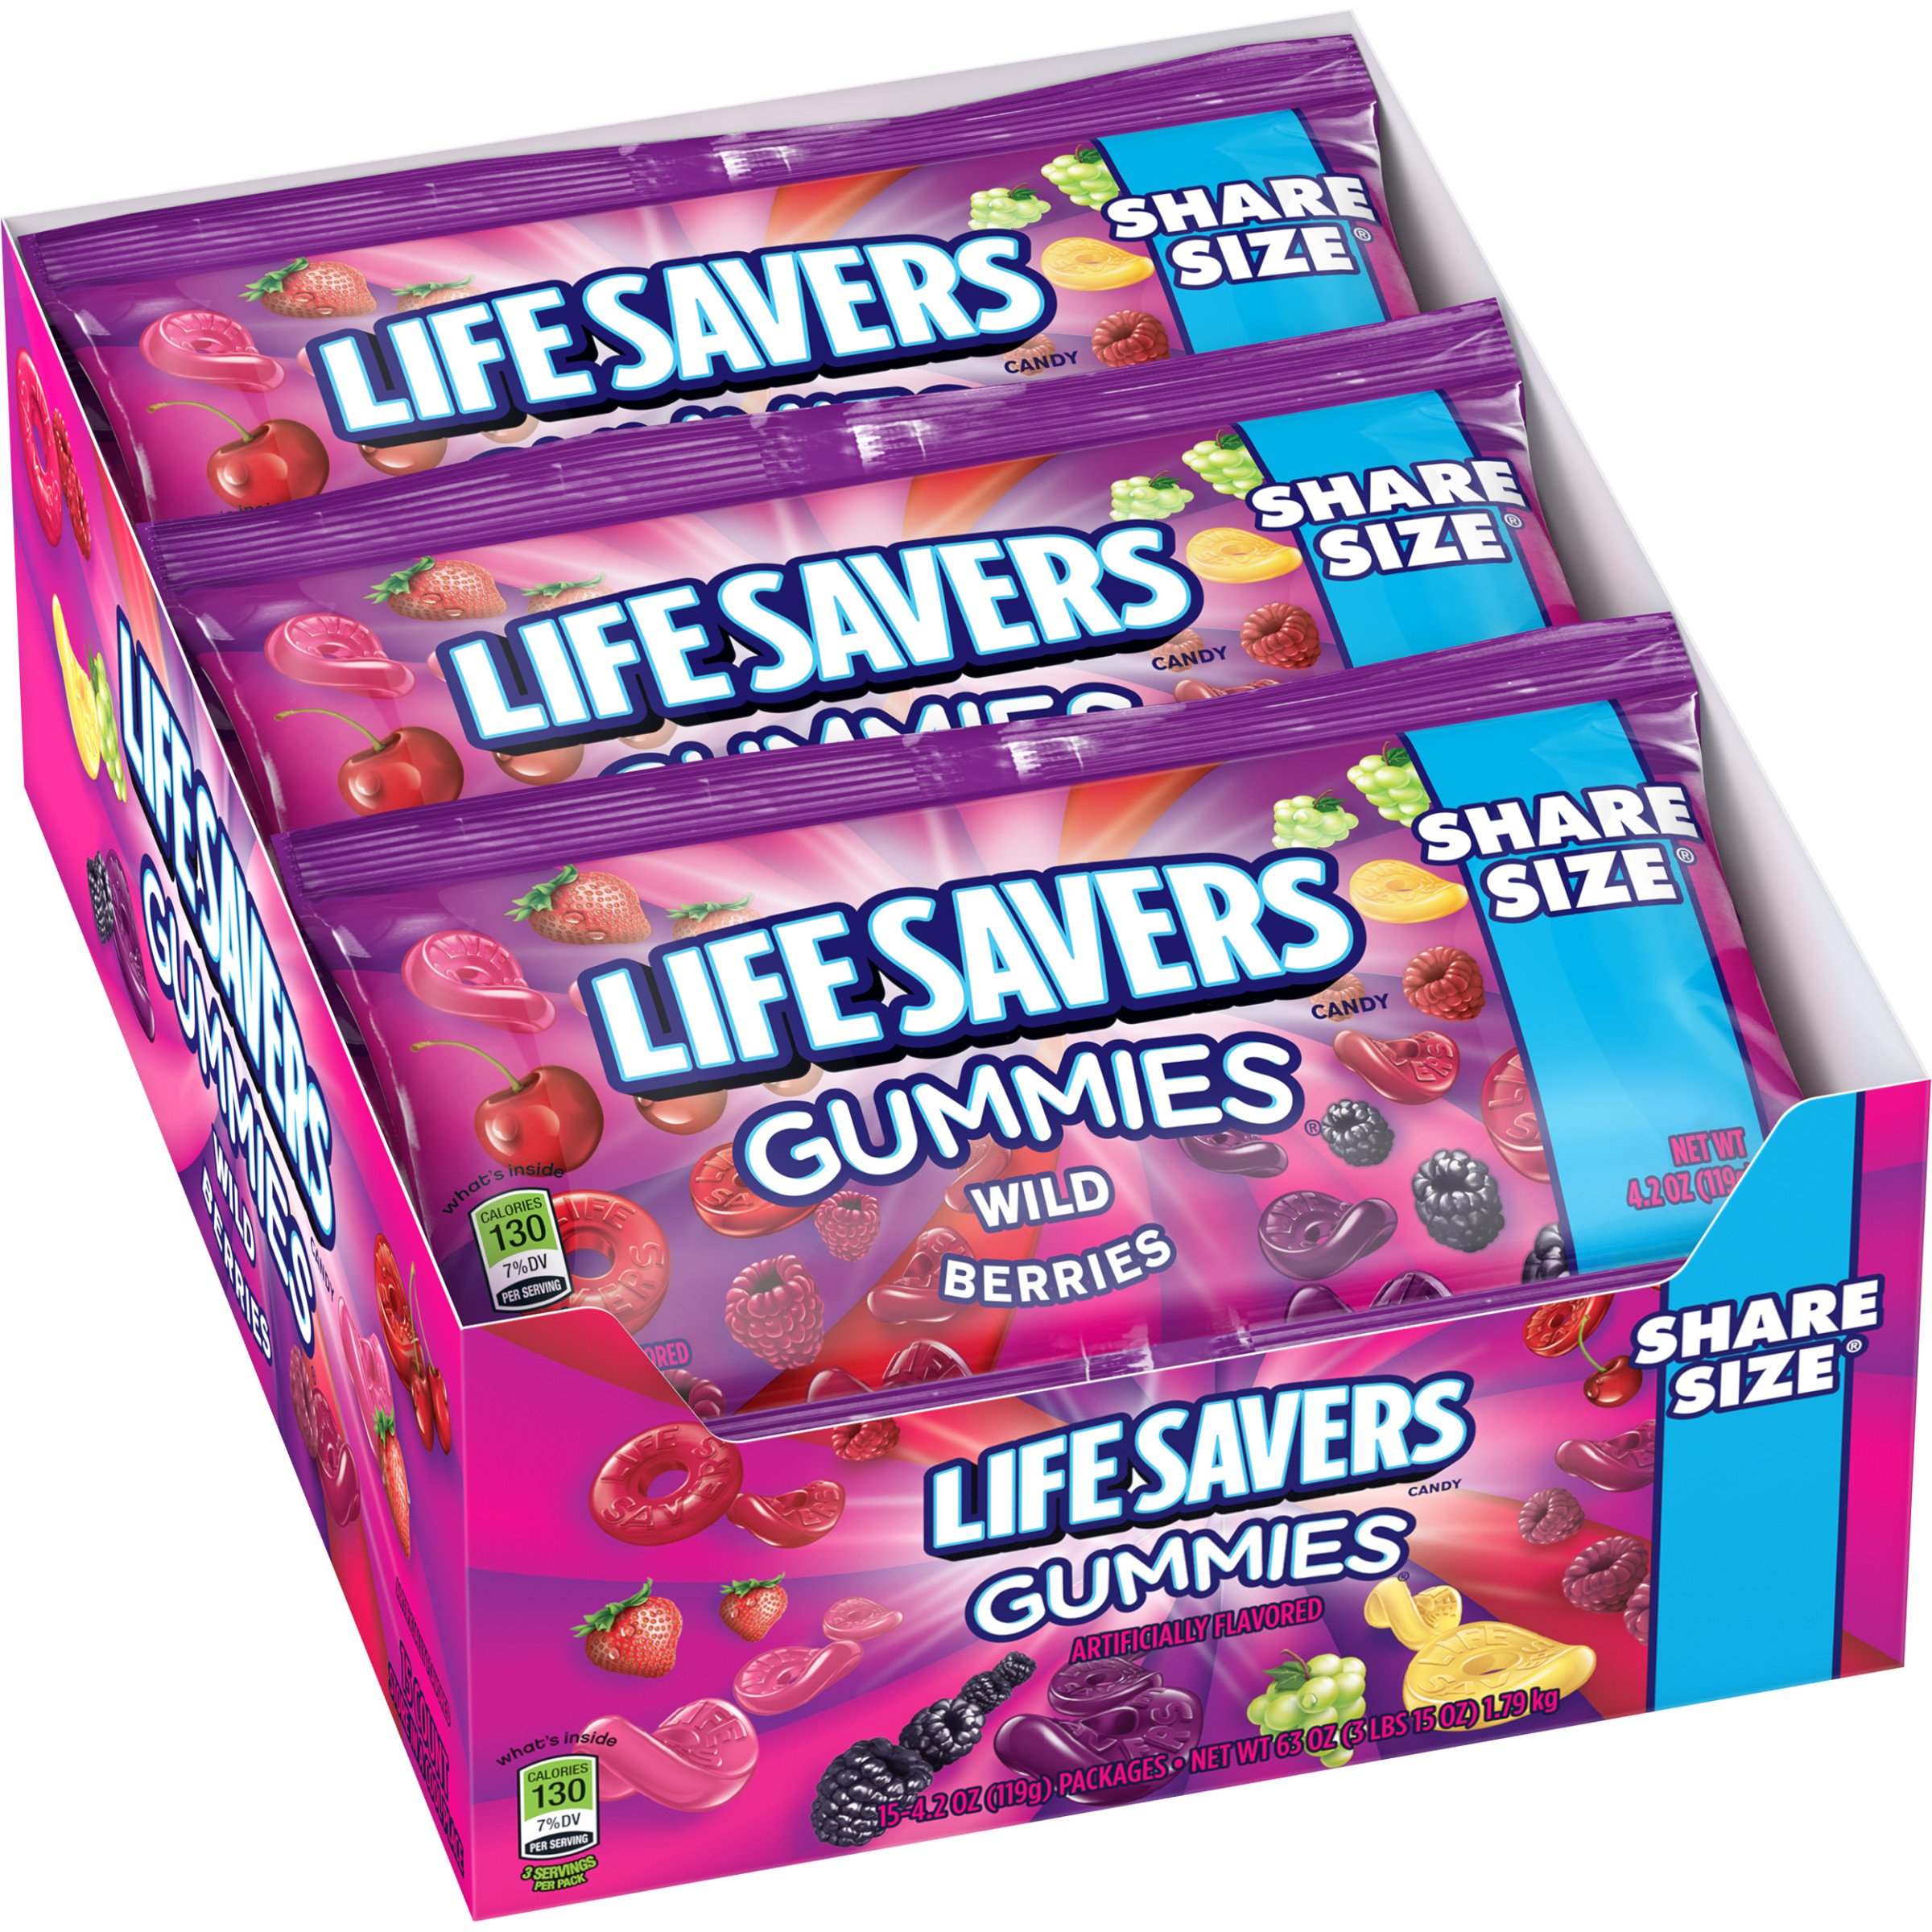 Life Savers Wild Berries Gummies Candy, 4.2 Ounce (15 Share Size Packs) (Pack of 15)